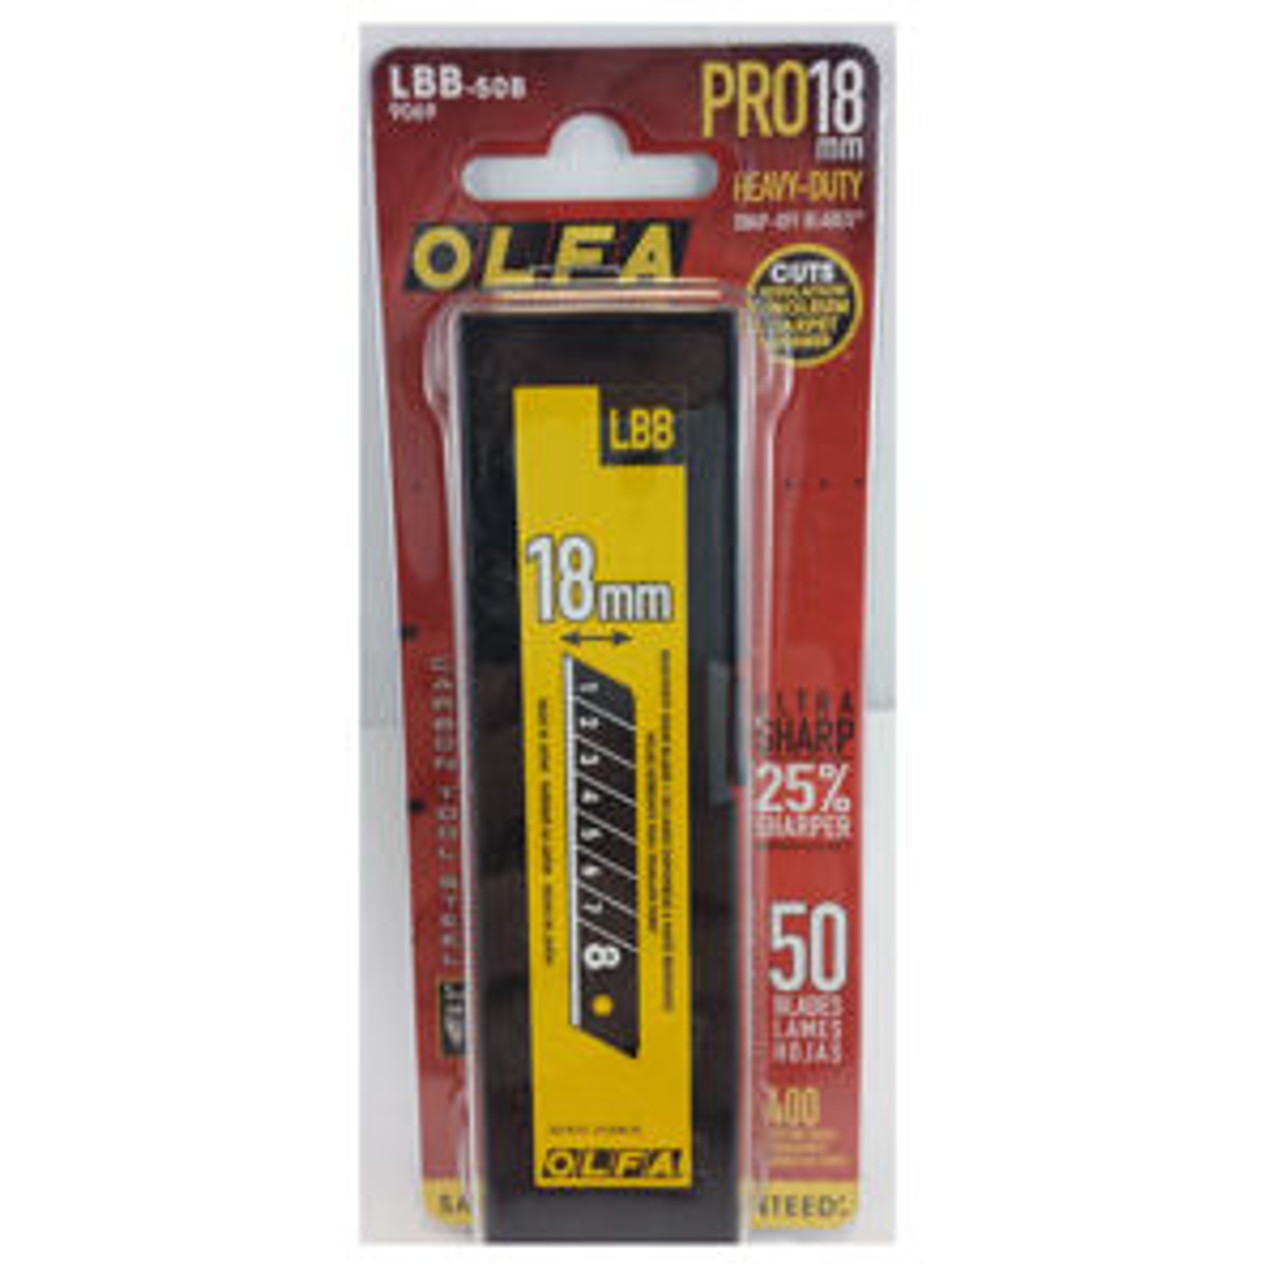 OLFA Stainless Blade (50 pack)